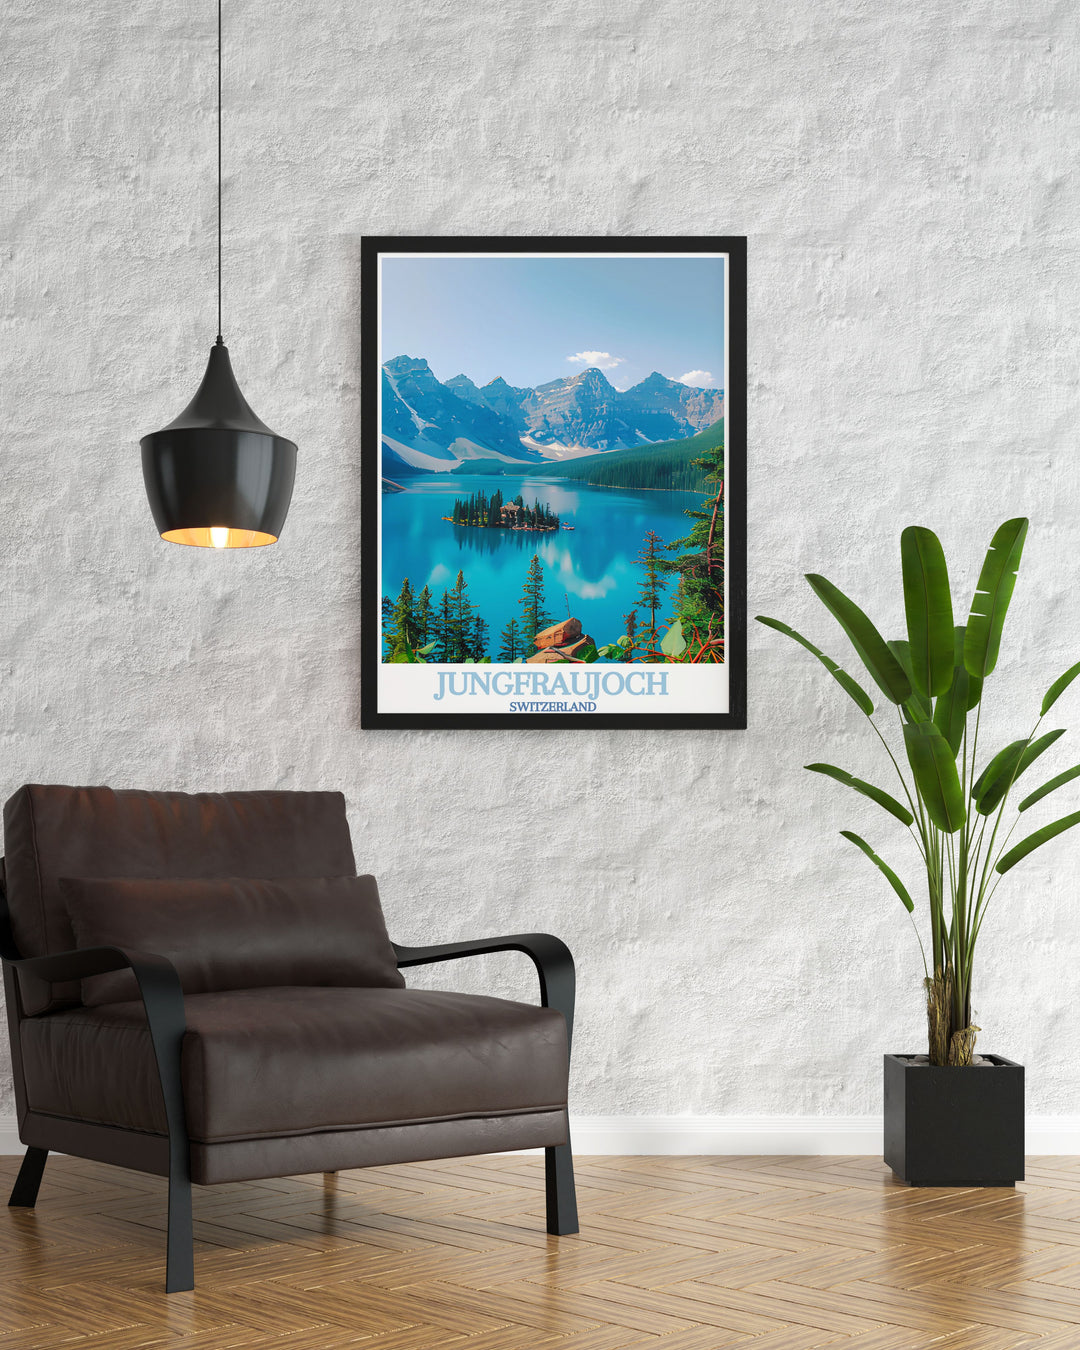 Poster highlighting the scenic beauty and thrilling journey to Jungfraujoch, the "Top of Europe," making it an ideal addition to your travel art collection.